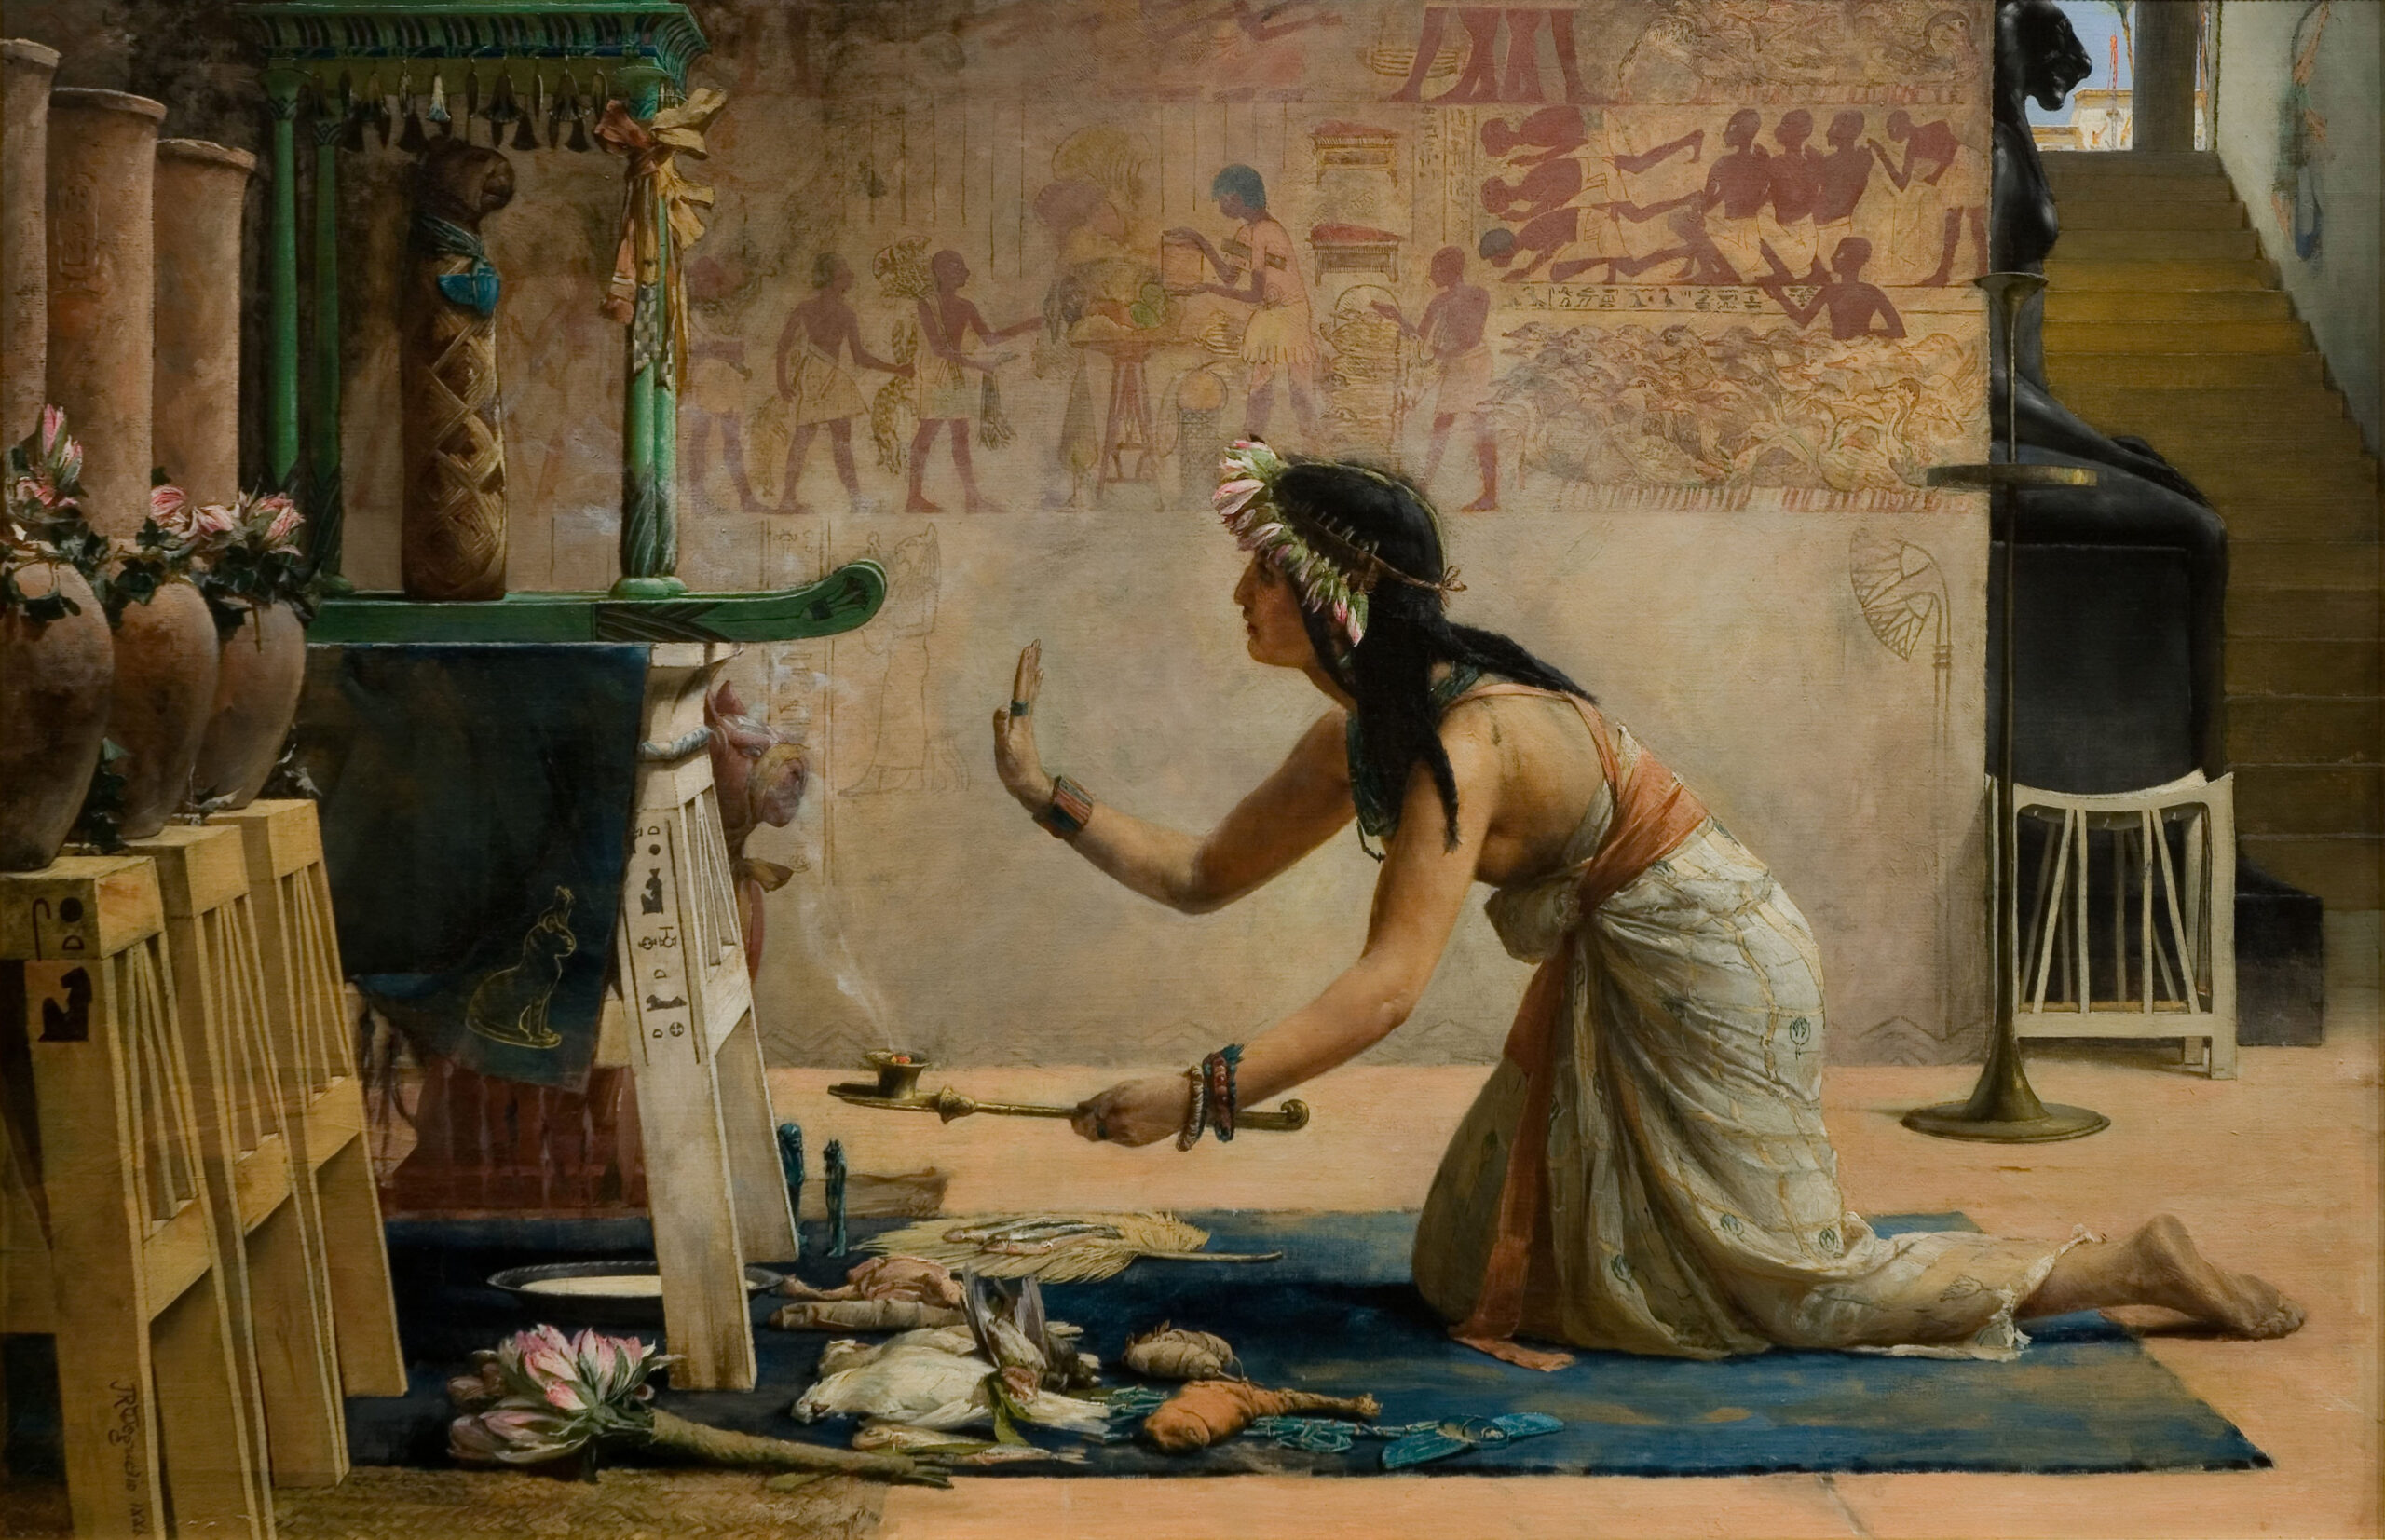 A painting of an Egyptian woman performing a ritual in front of a small stone altar in a tomb. Several colorful motifs adorn the walls behind her.